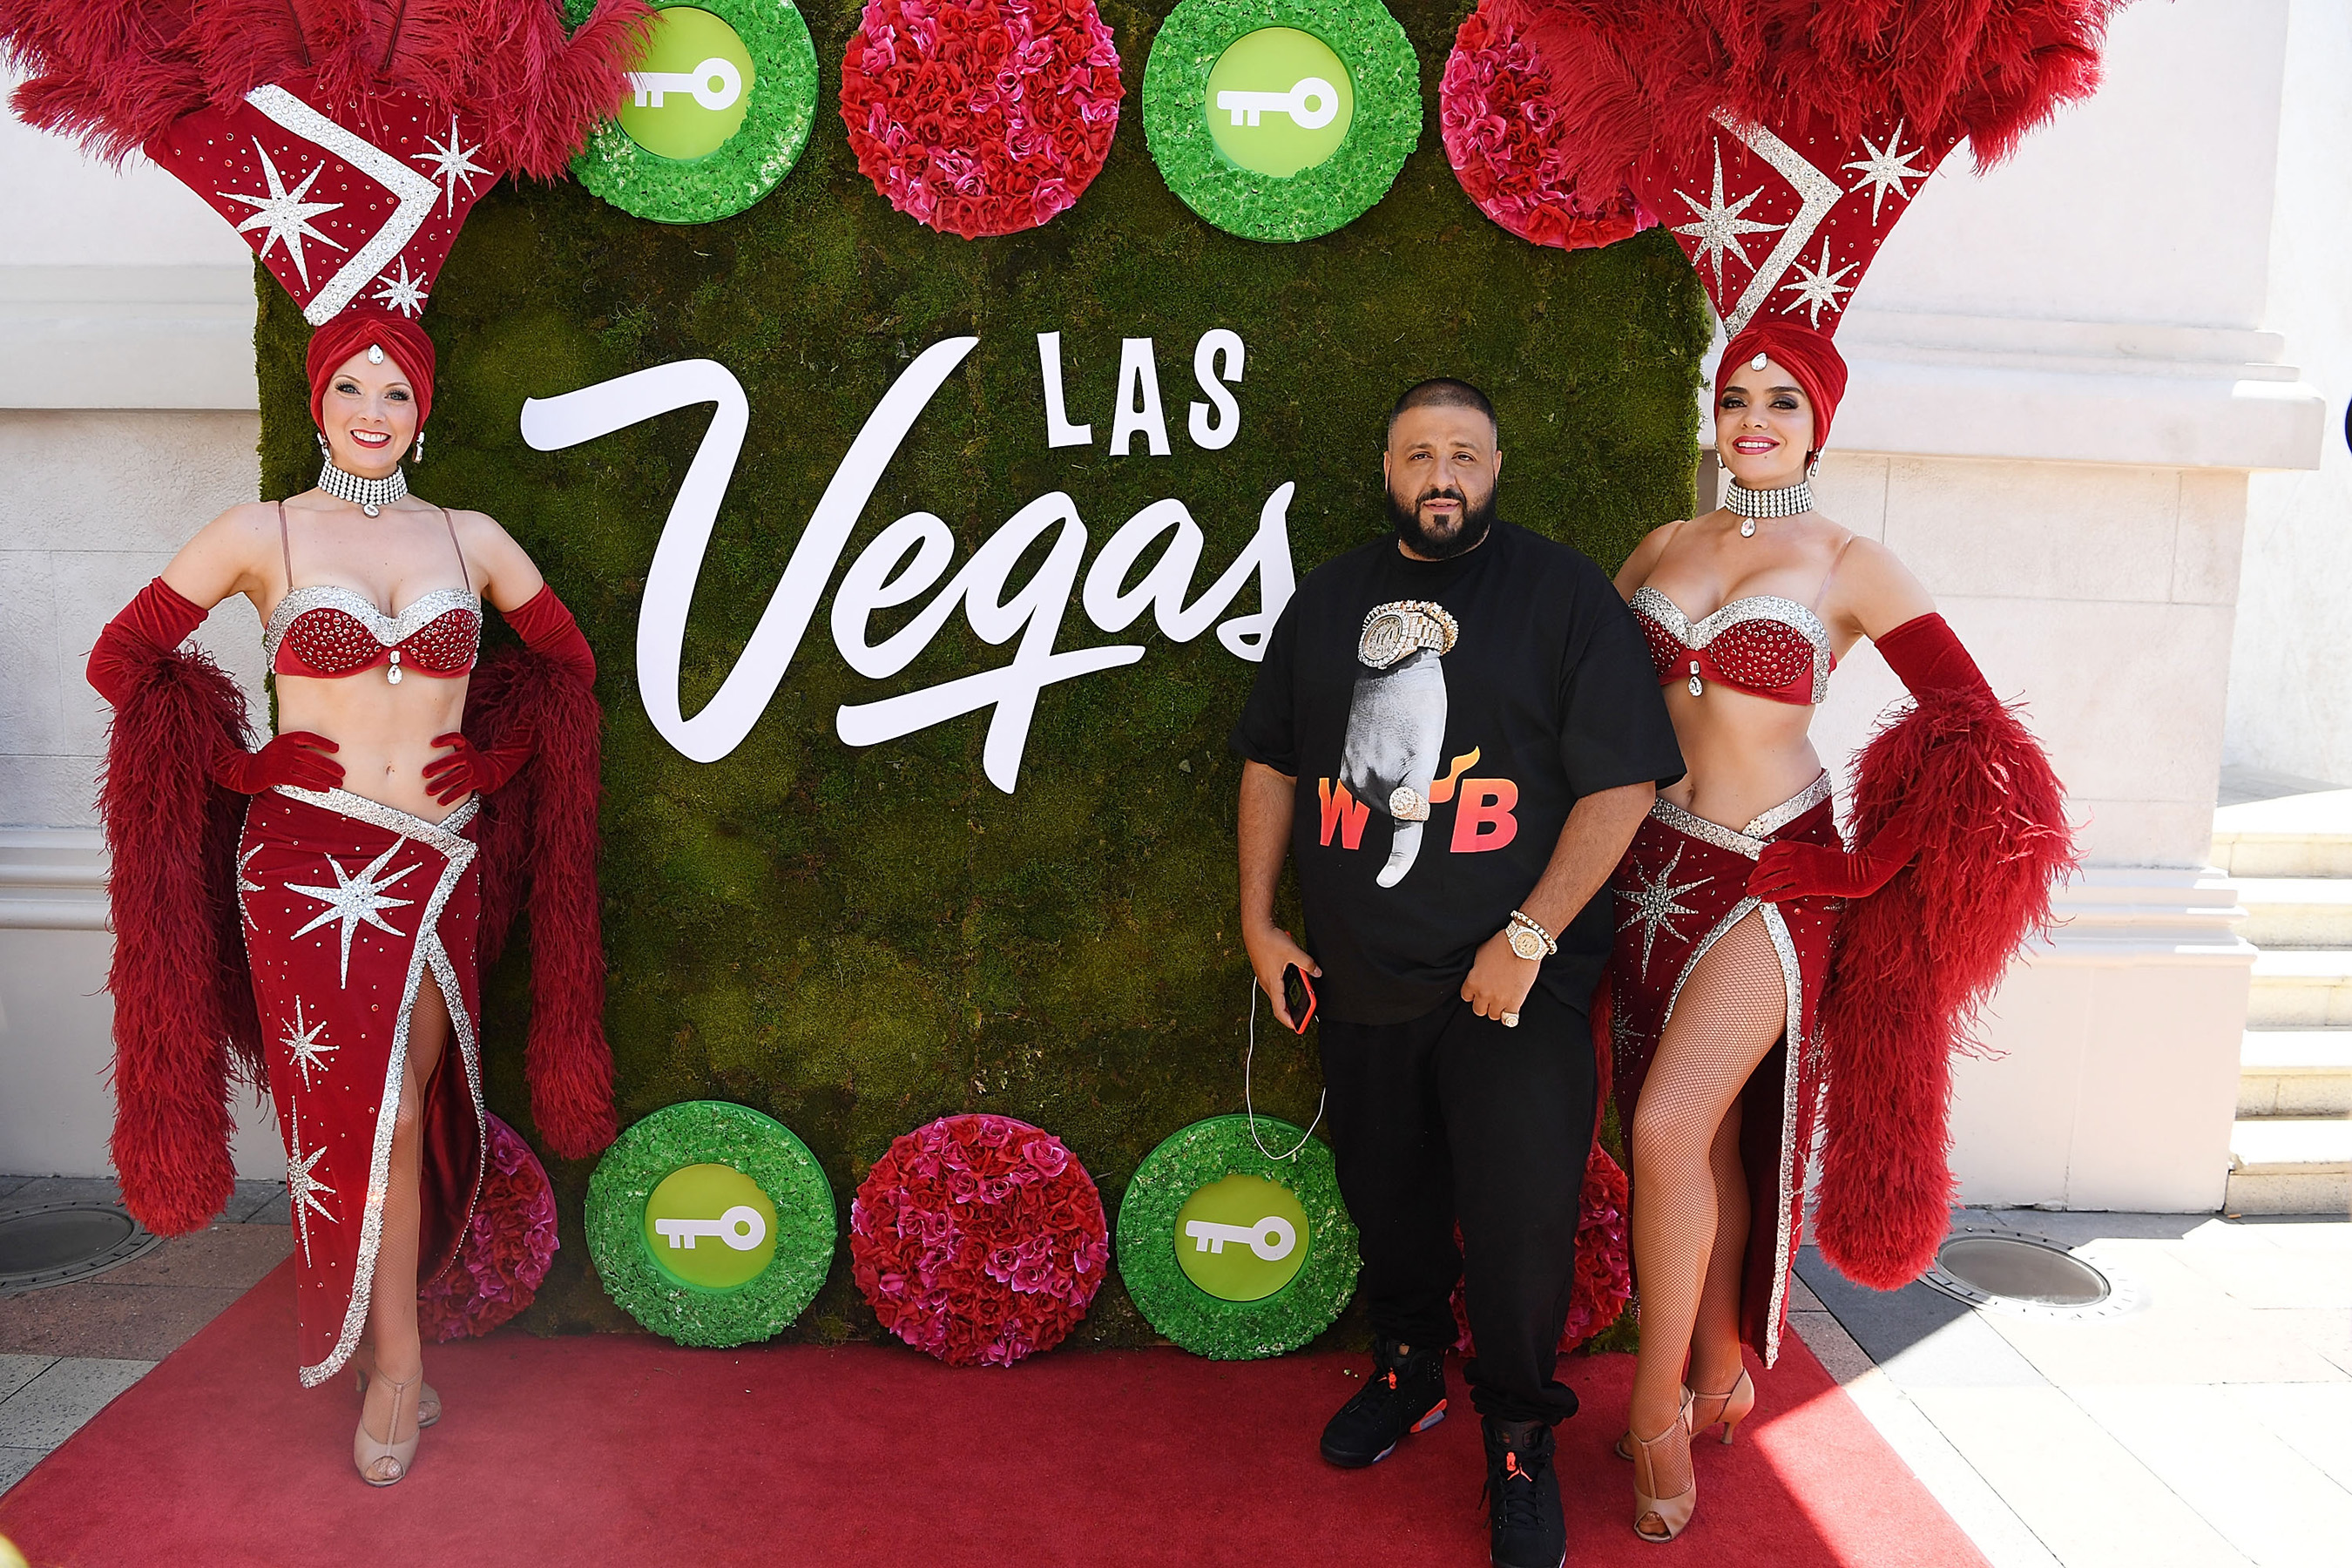 Las Vegas celebrated the launch of its official Snapchat channel by presenting the “King of Snapchat,” DJ Khaled with a key to the Strip